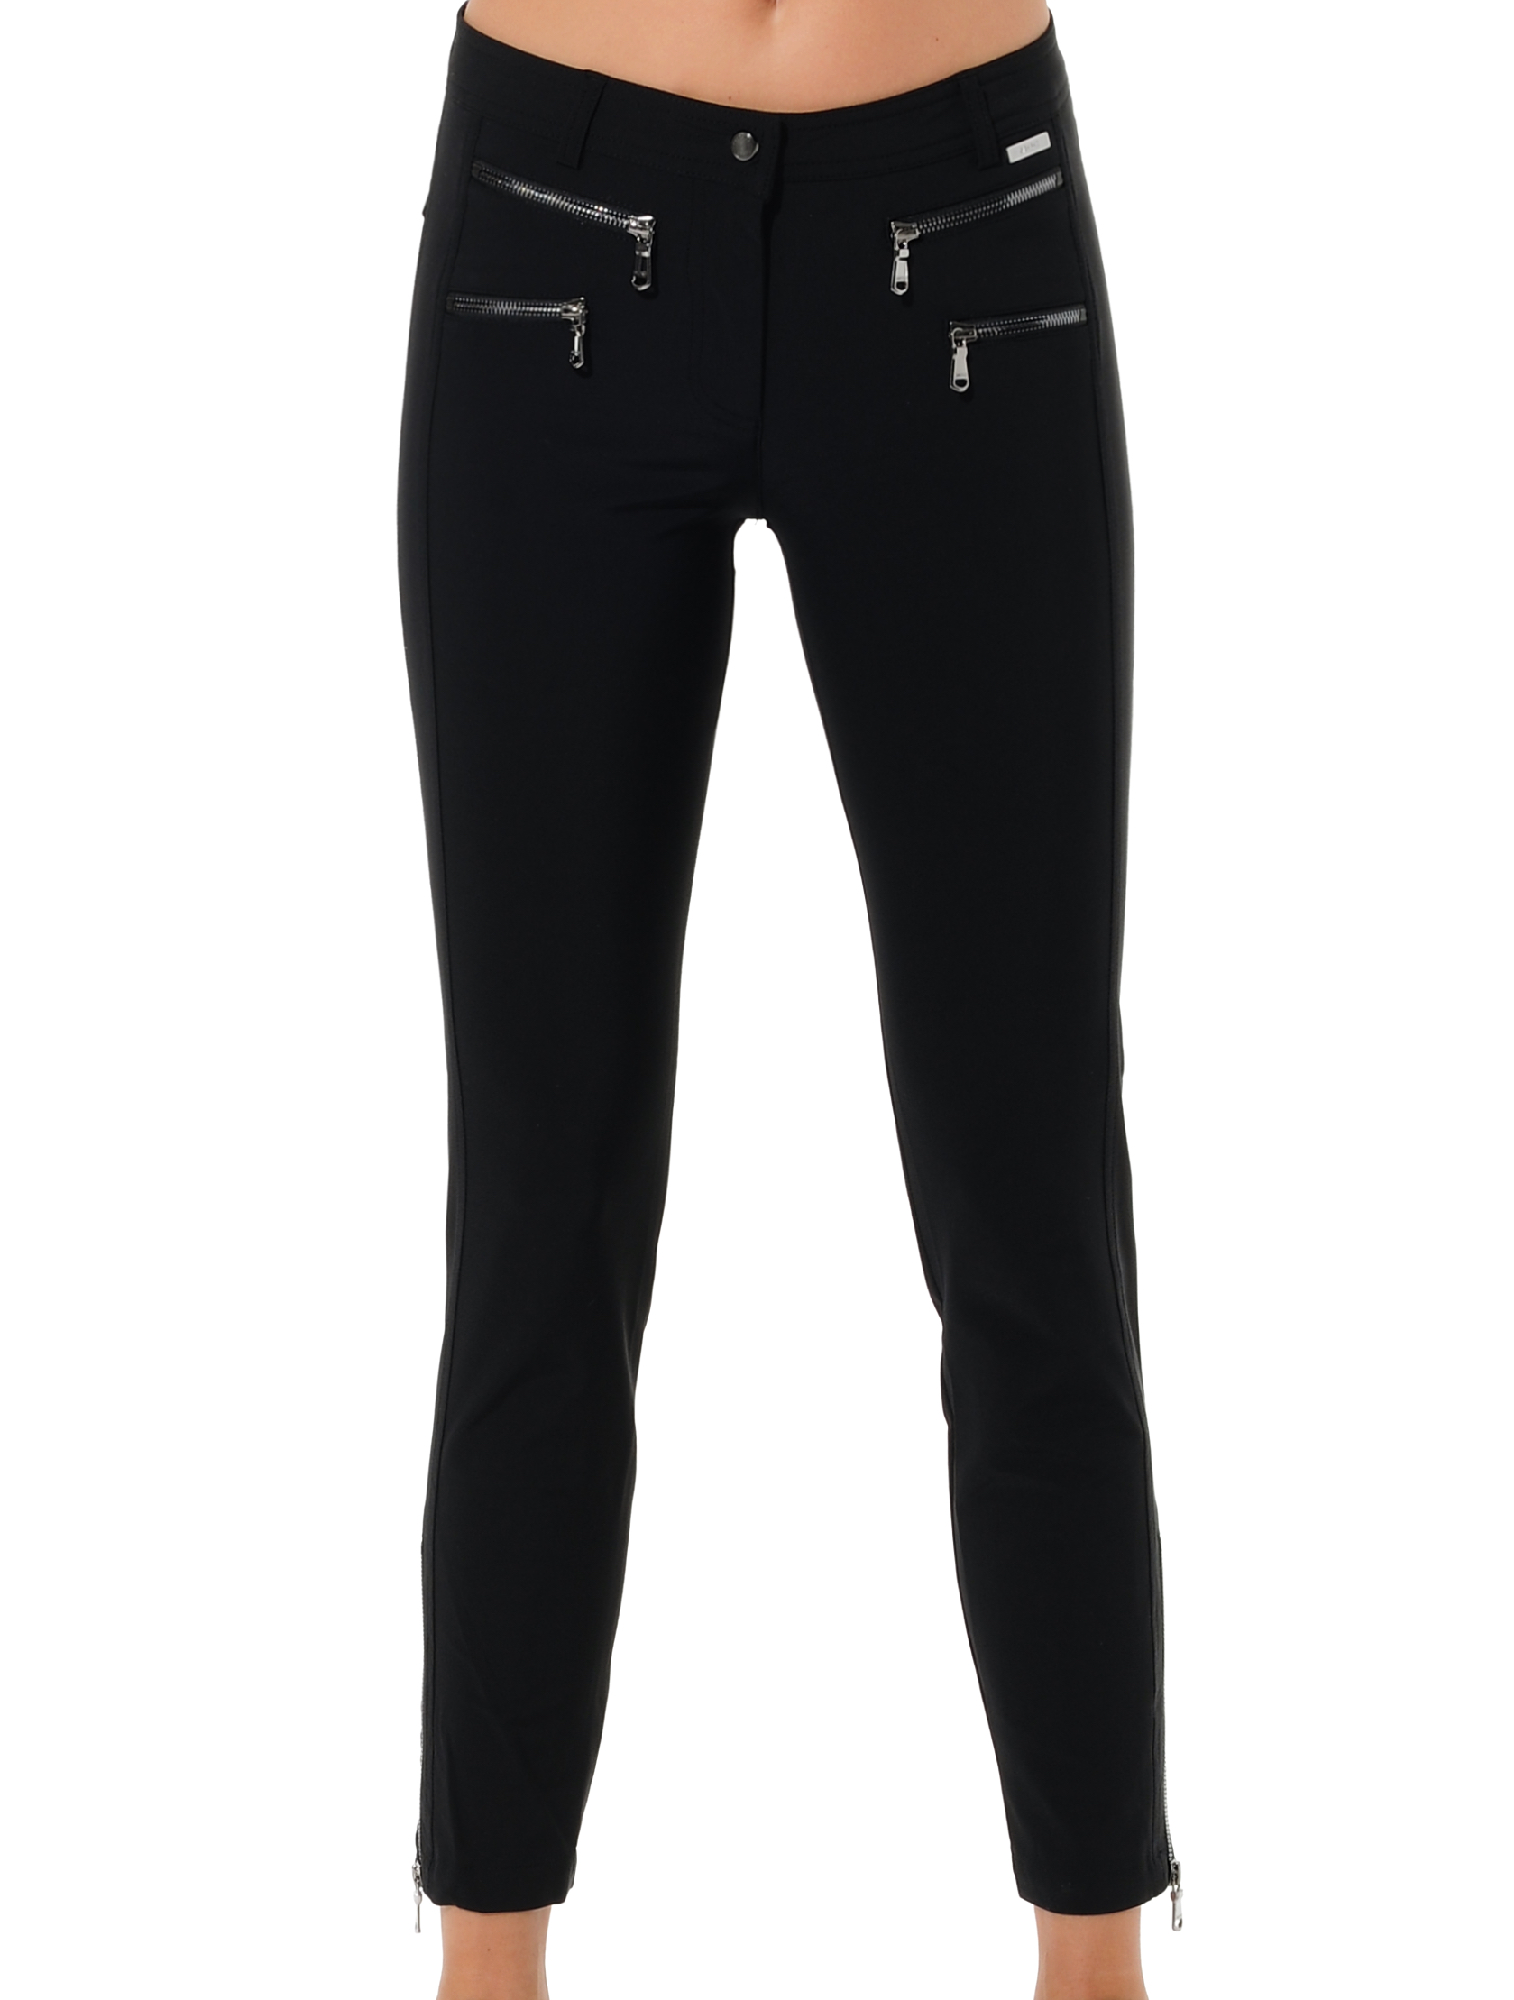 4way stretch double zip ankle pants black 